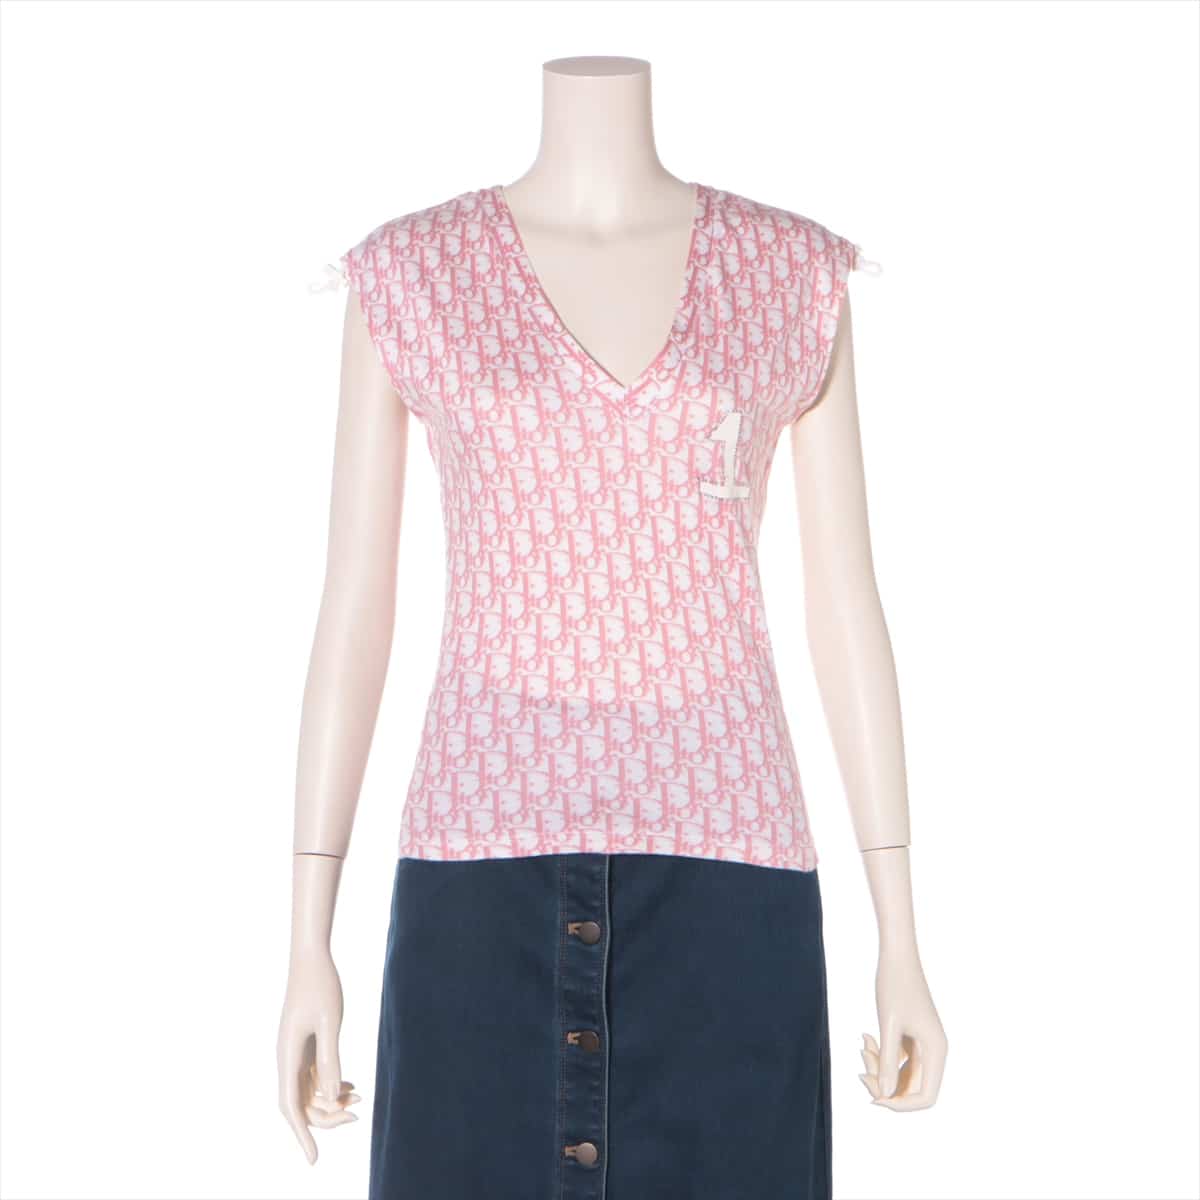 Christian Dior Trotter Cotton Tank top 36 Ladies' Pink  4P16155500